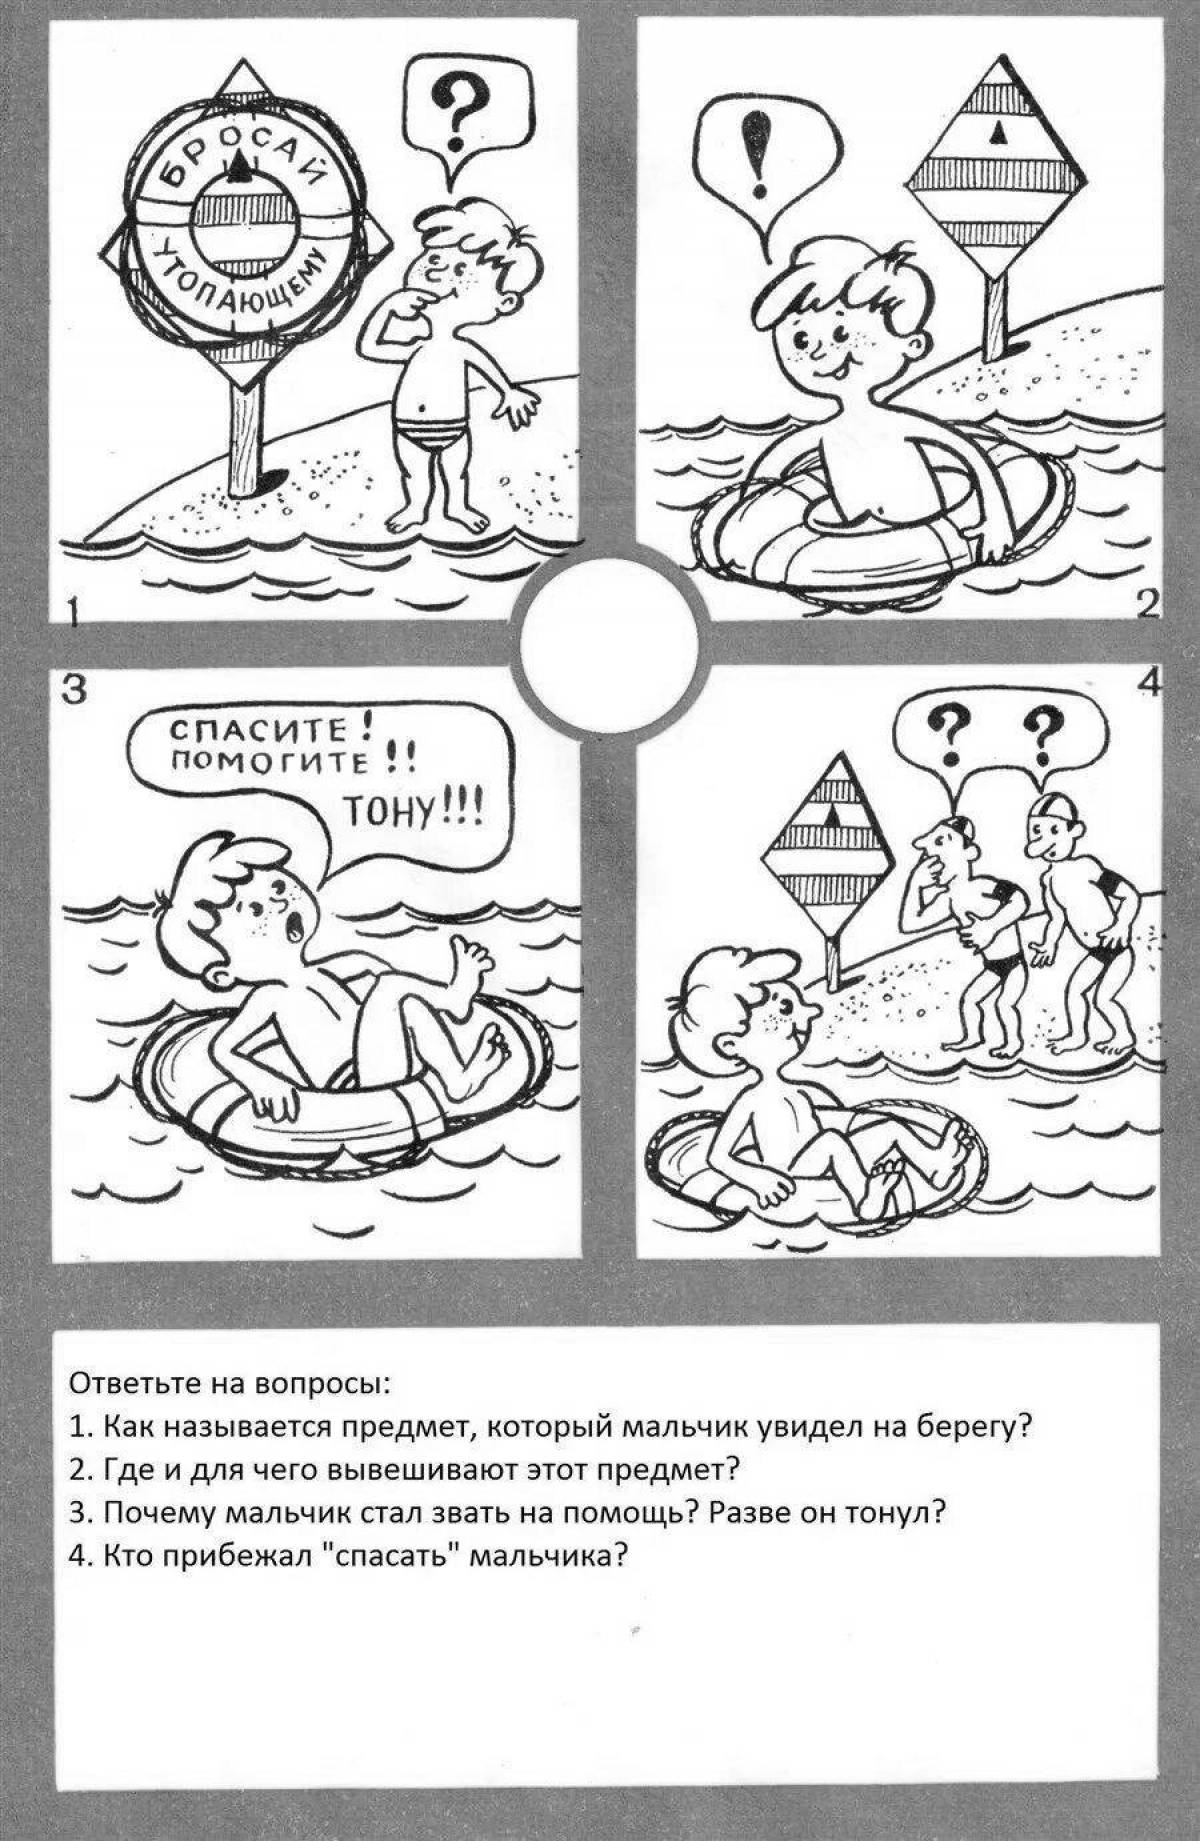 Water safety animated coloring page